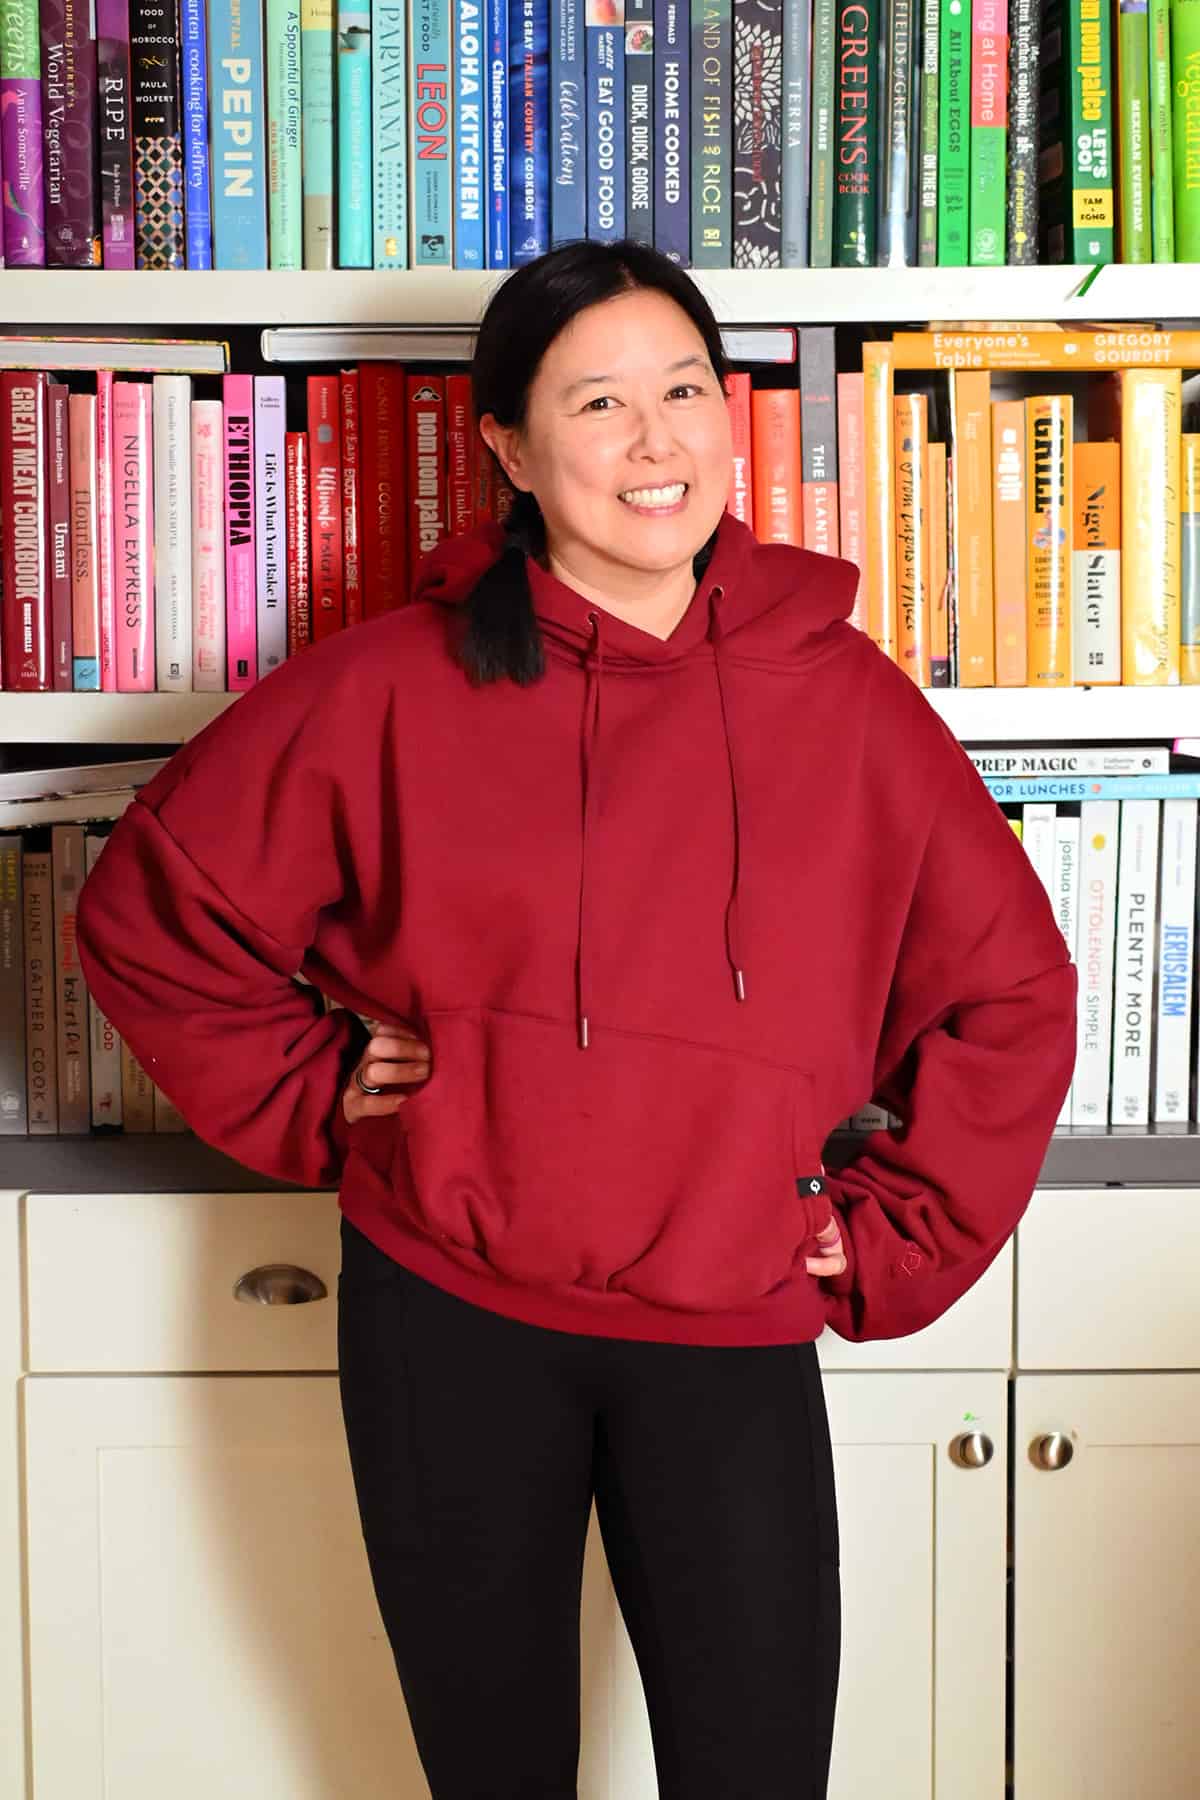 A smiling Asian woman in a red Popflex cloud hoodie and black leggings in front of a bookcase filled with colorful cookbooks.